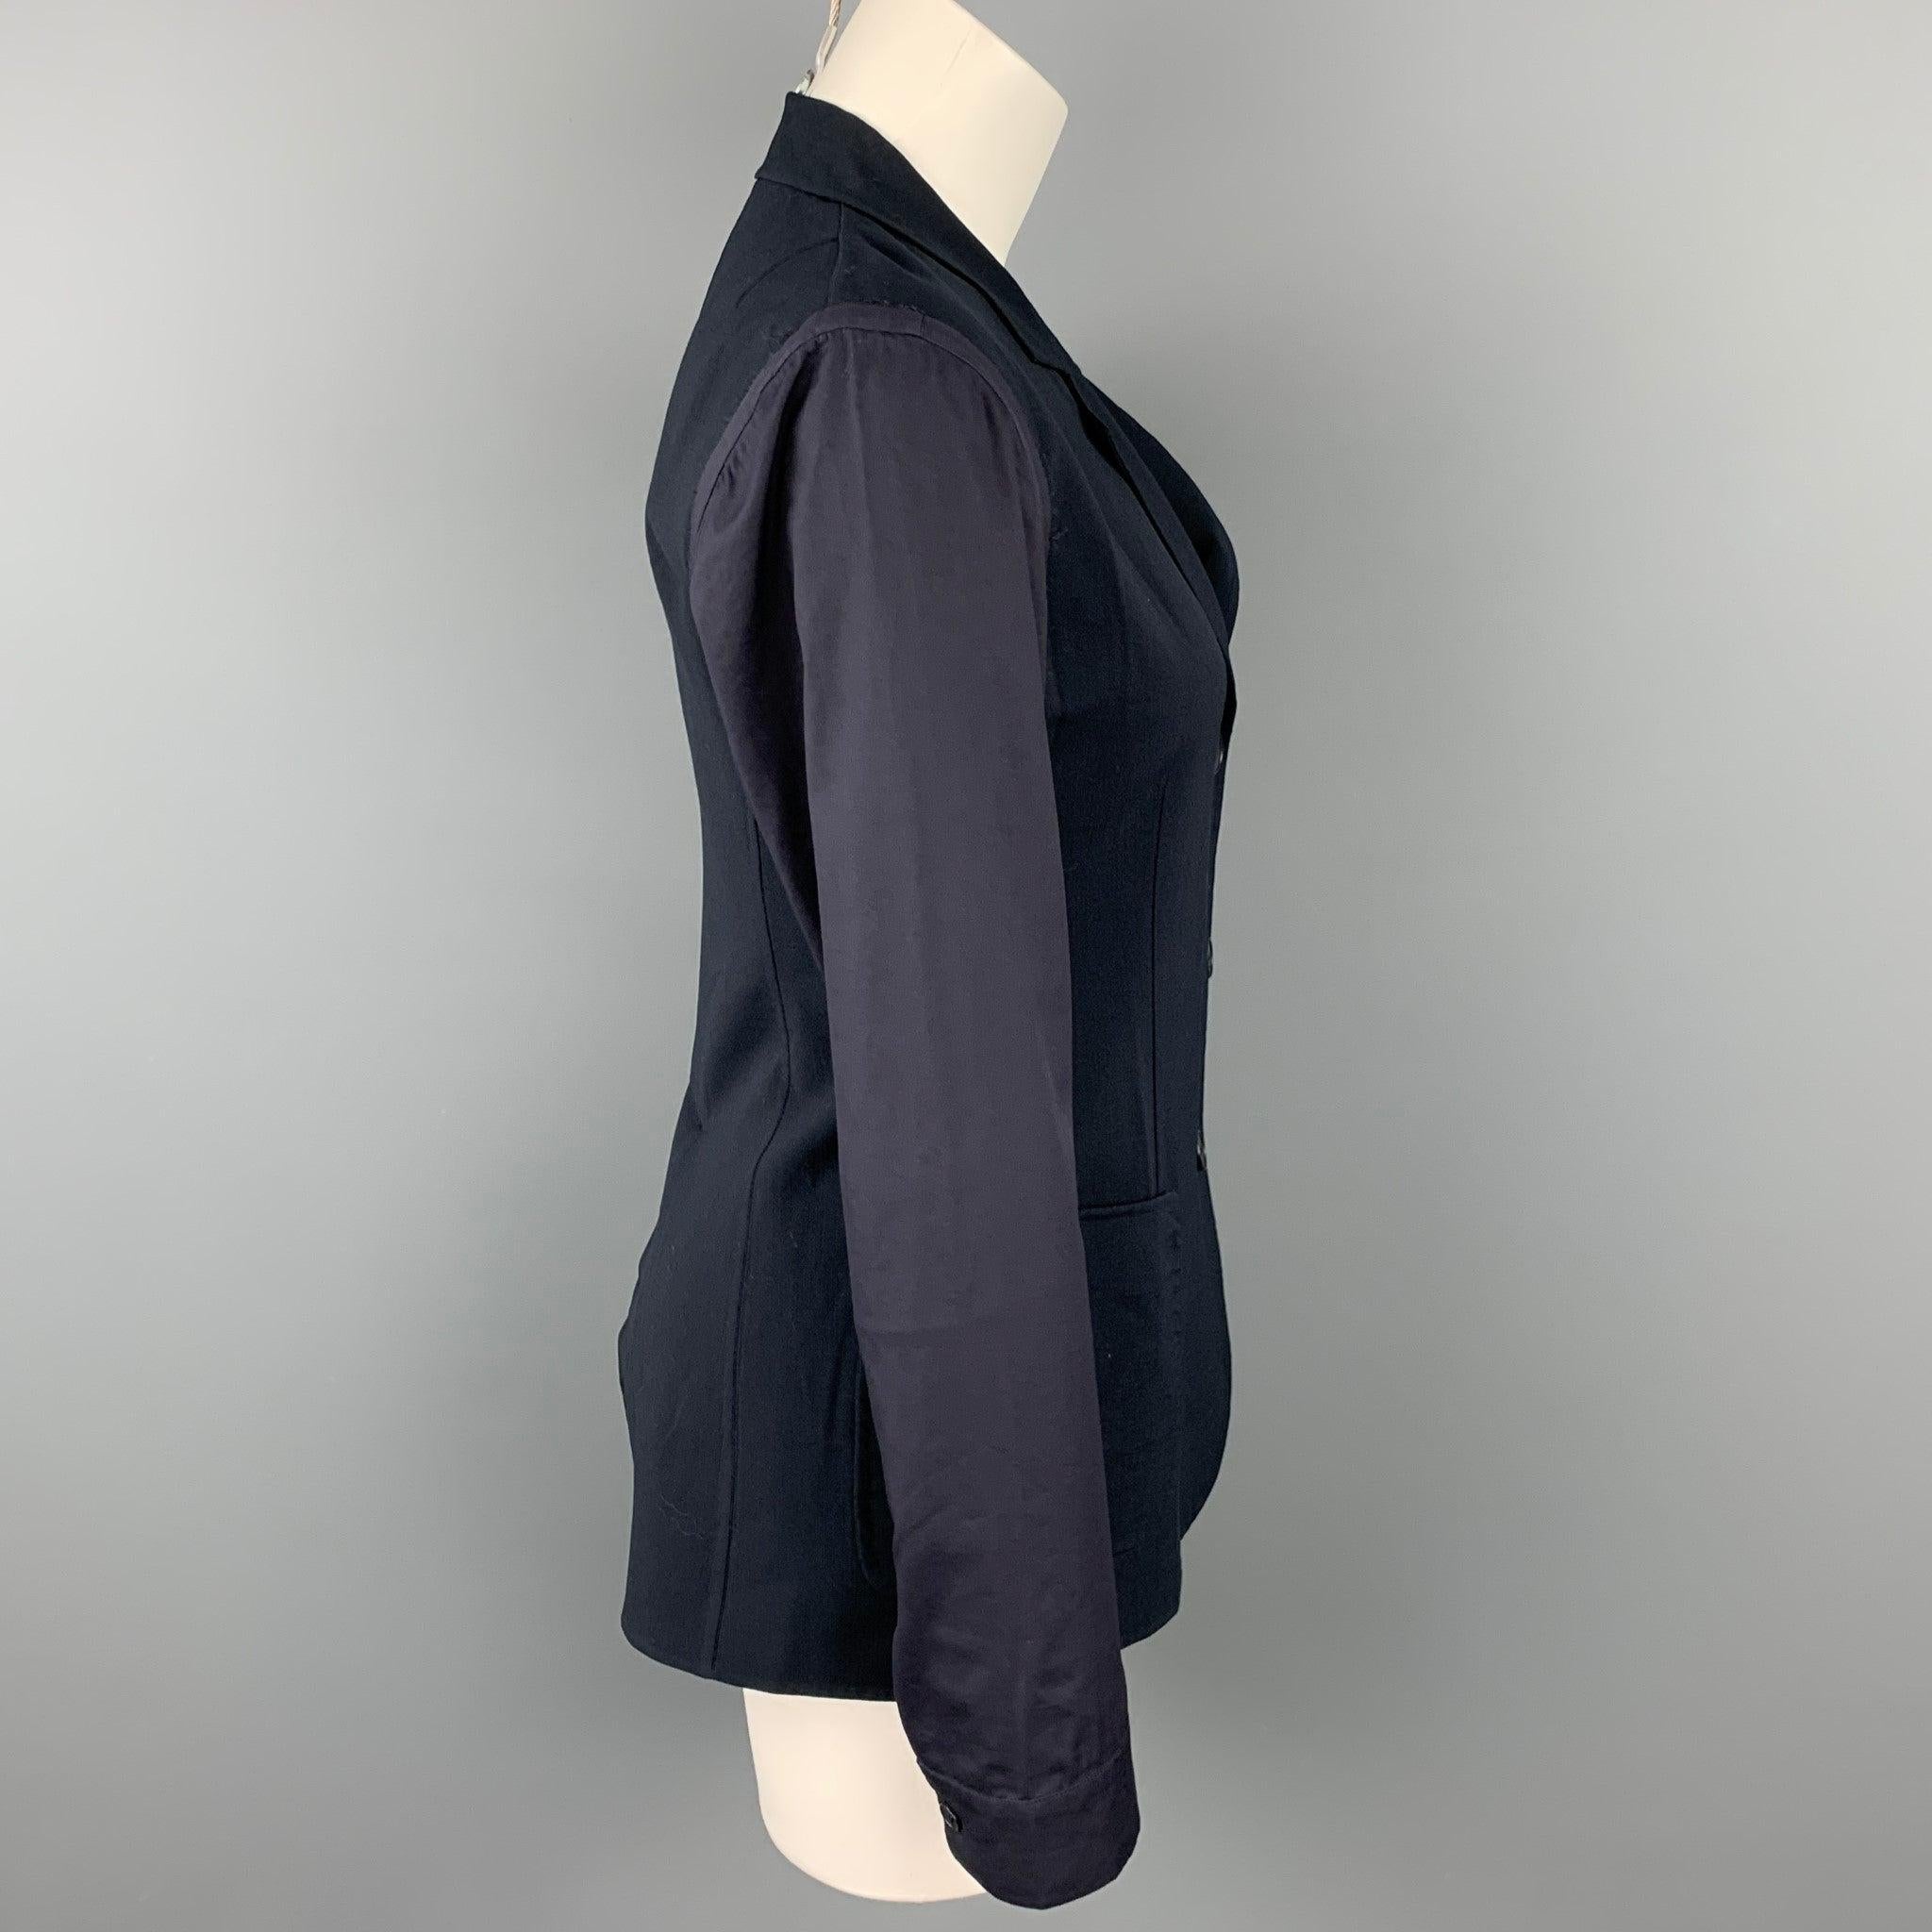 JIL SANDER blazer comes in a navy two toned virgin wool featuring a notch lapel, patch pockets, and a buttoned closure. Made in Italy.Very Good
Pre-Owned Condition. 

Marked:   34 

Measurements: 
 
Shoulder: 15.5 inches  Bust: 32 inches Sleeve: 25